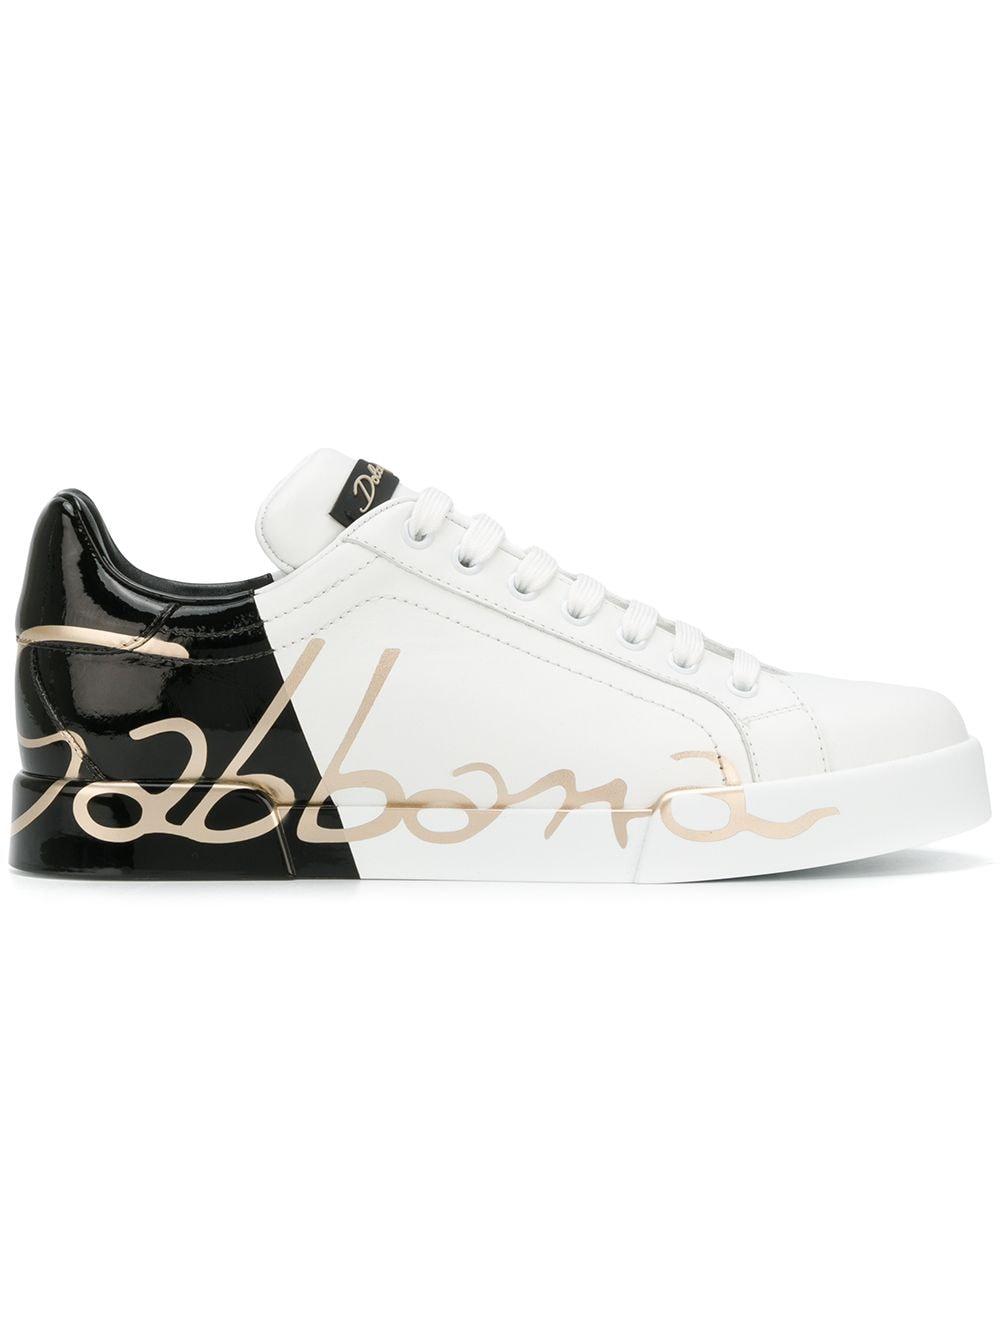 Dolce & Gabbana Portofino Sneakers With Patent Leather Heel in White | Lyst